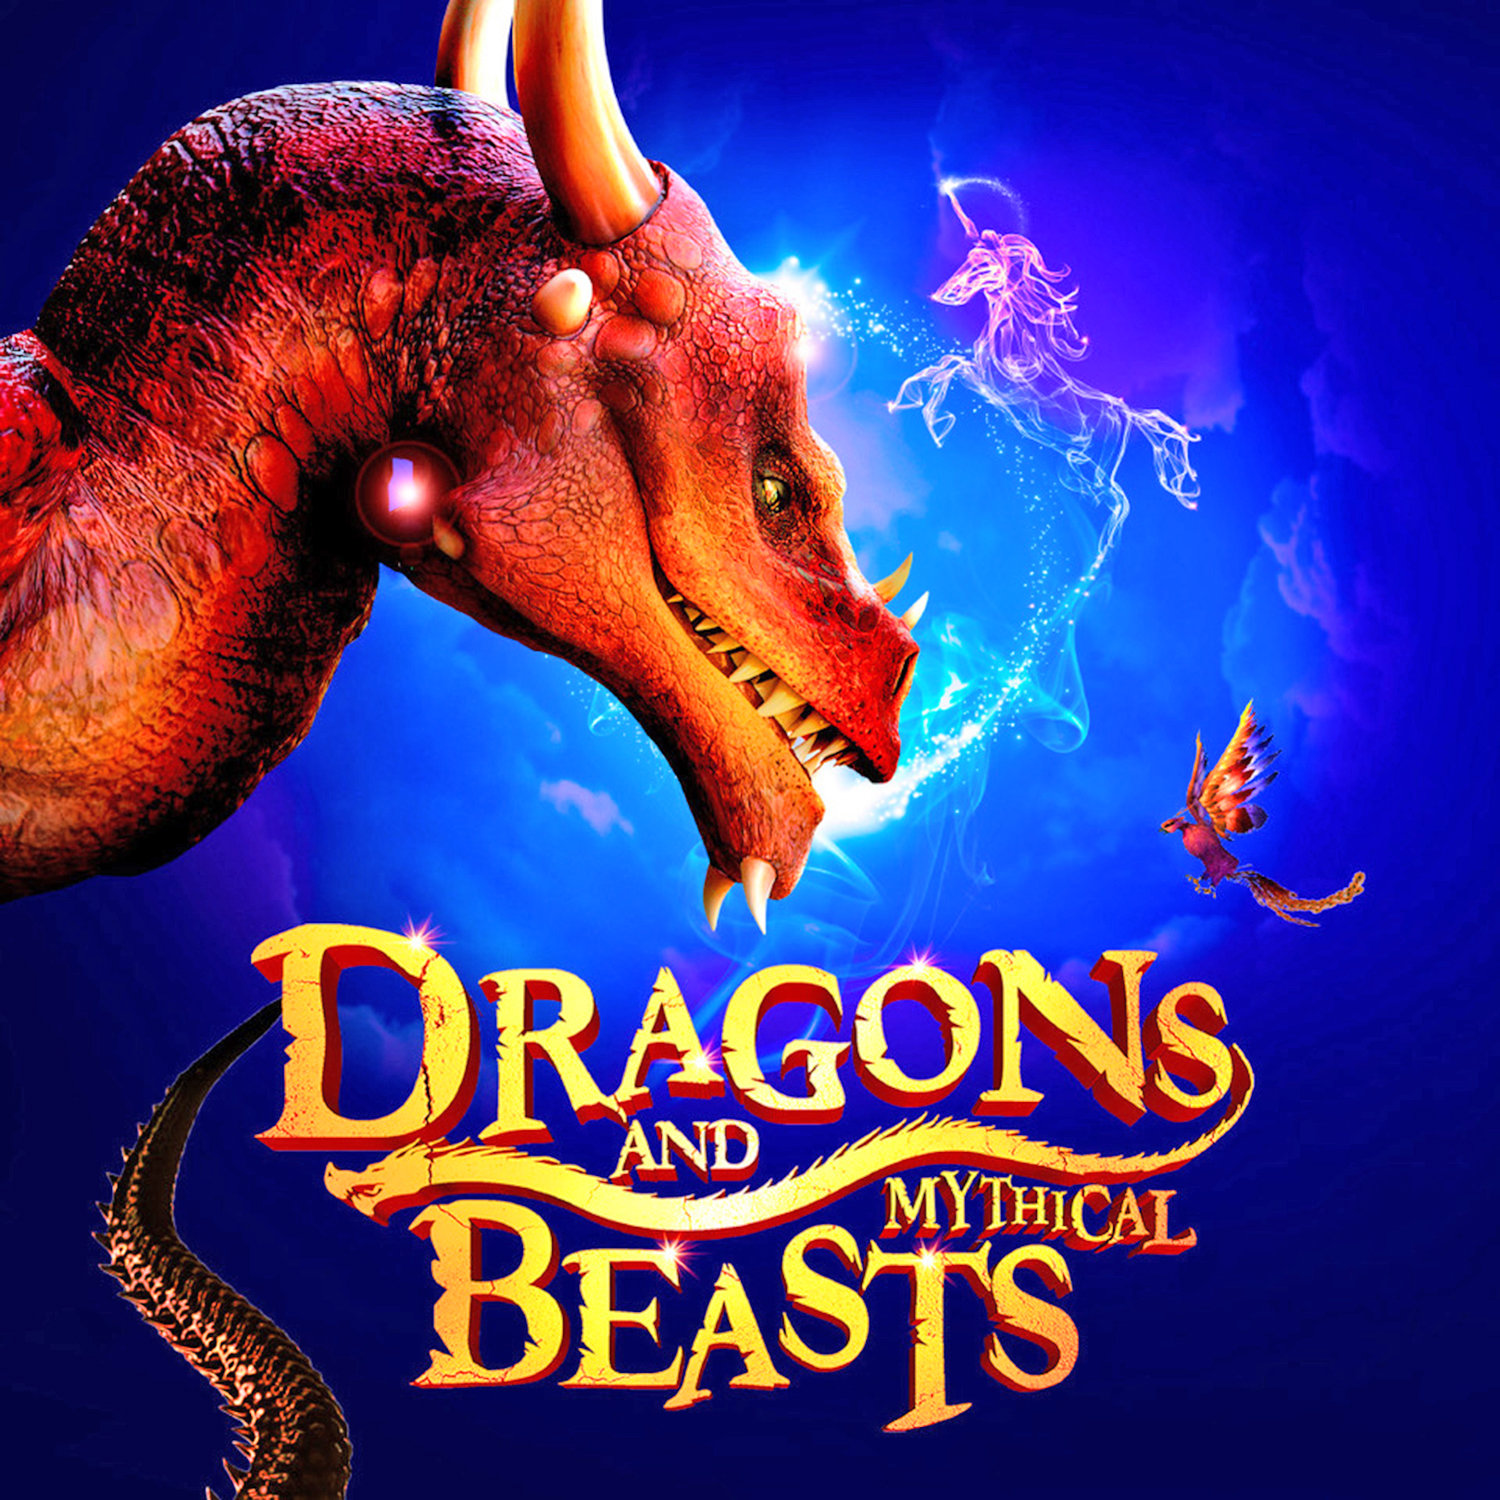 “Dragons and Mythical Beasts” come alive at 7 p.m. Jan. 12 at the Stanley Theatre in Utica.